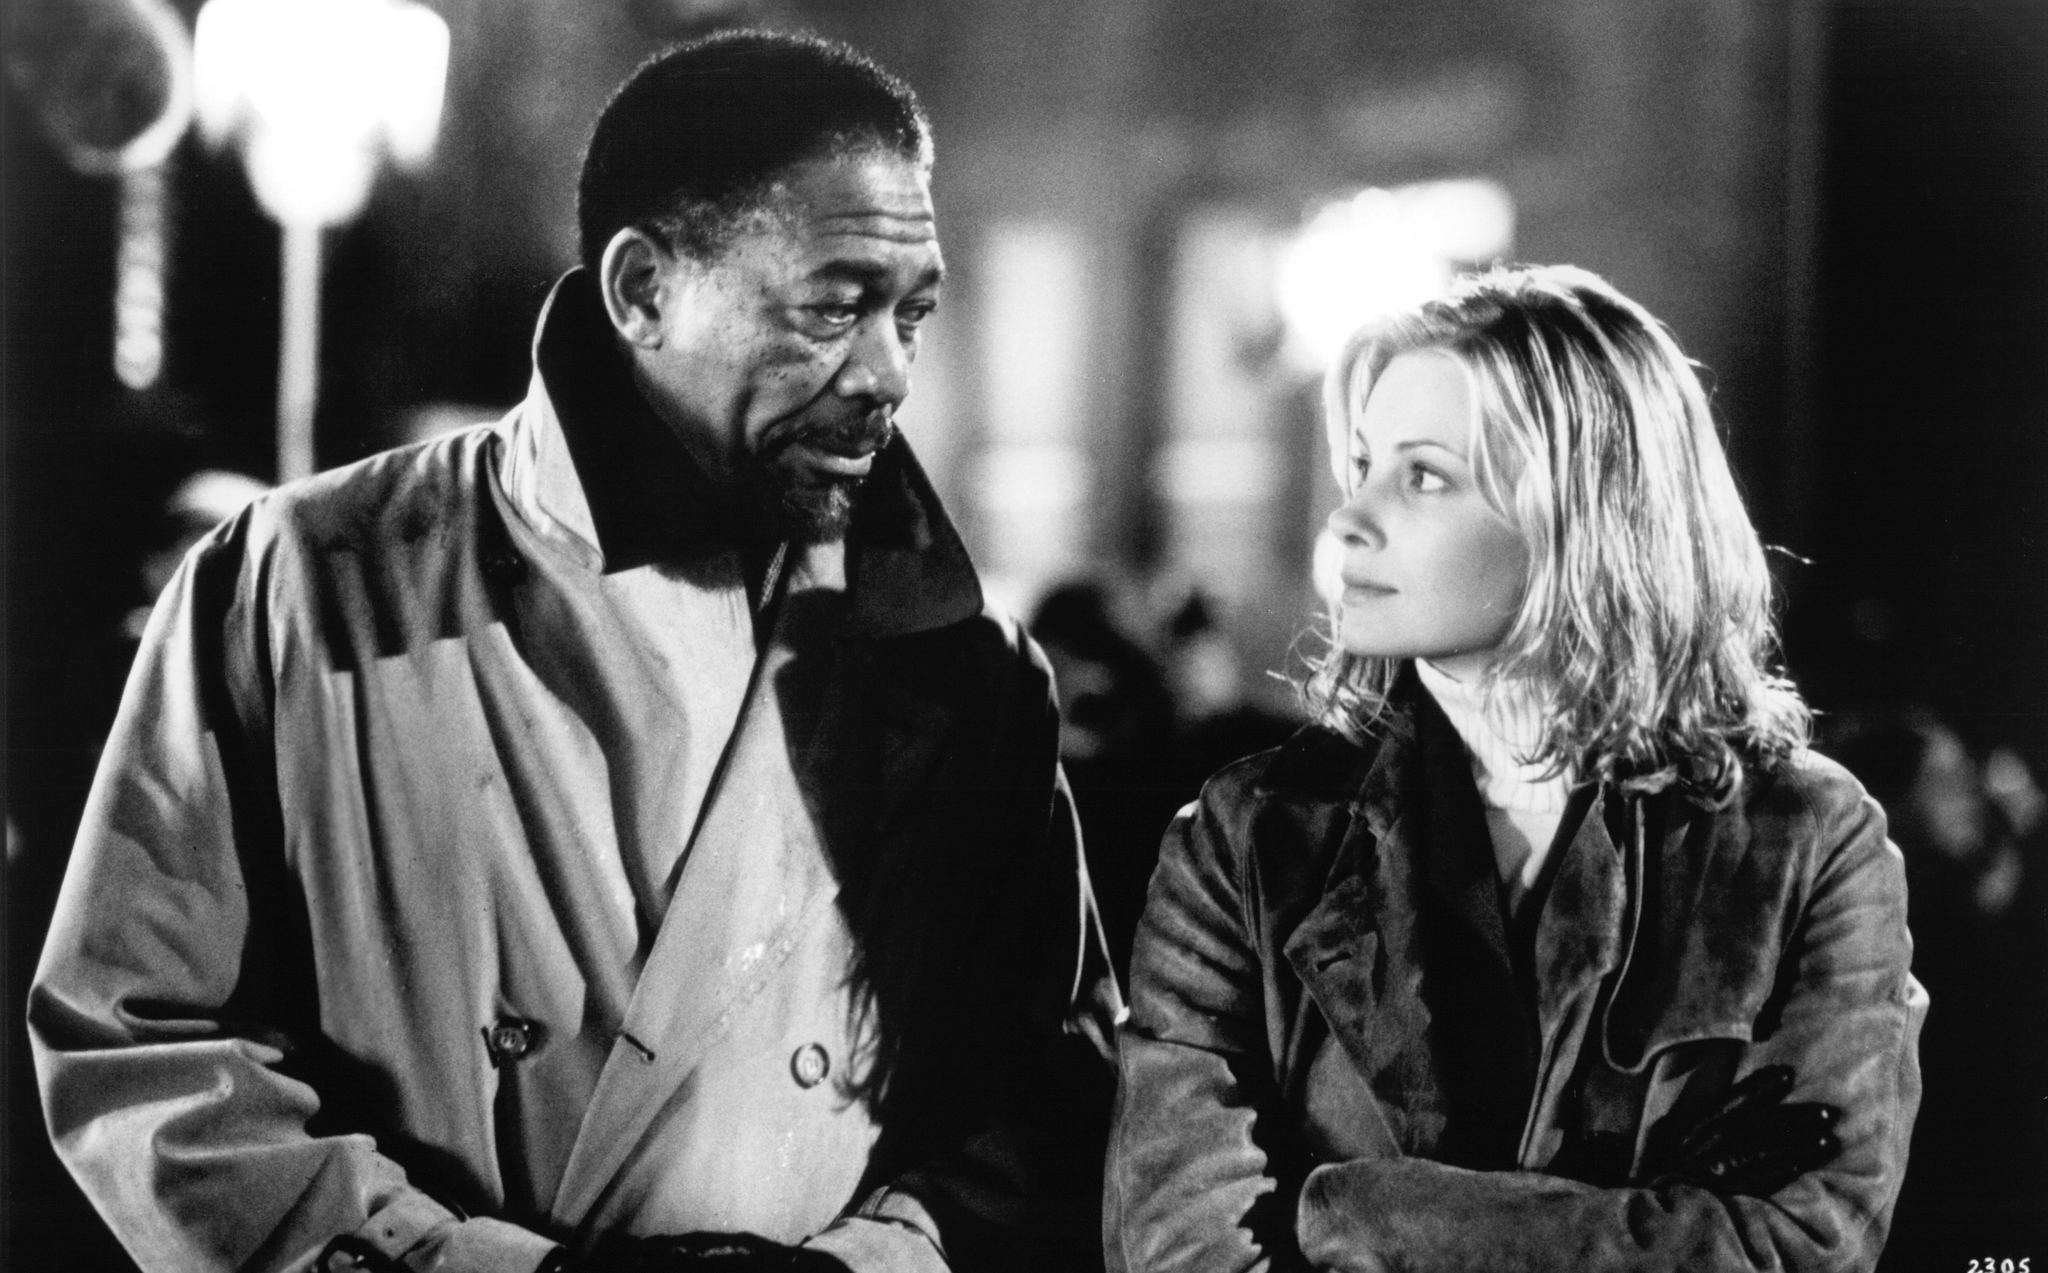 Still of Morgan Freeman and Monica Potter in Along Came a Spider (2001)